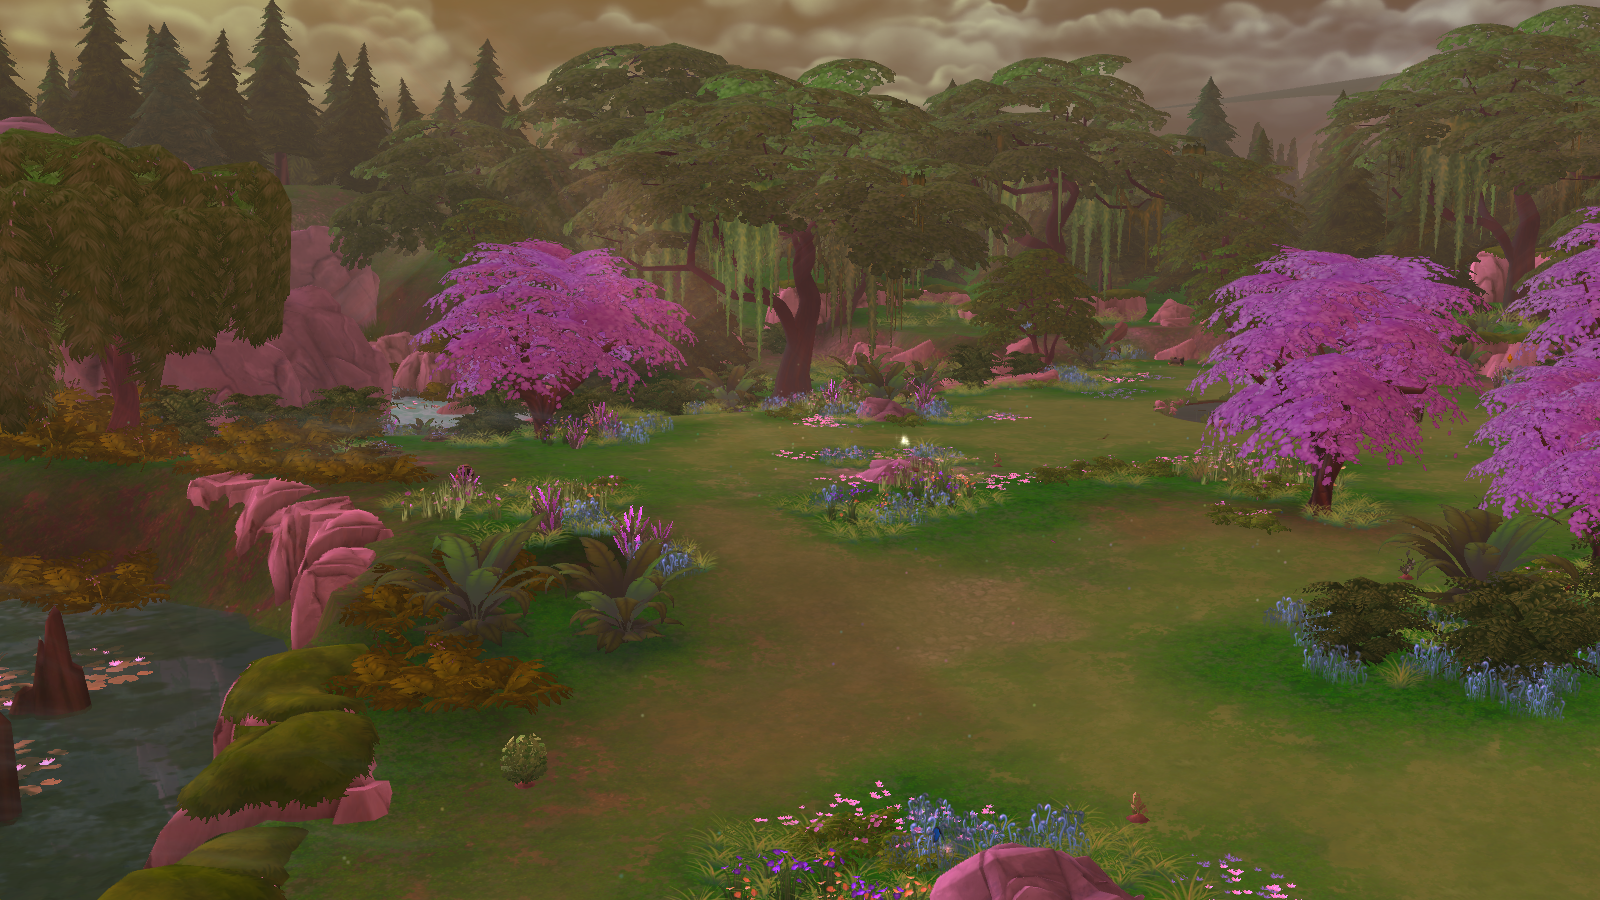 http://simcitizens.com/wp-content/uploads/2014/09/Sims-4-Sylvan-Glade-2.png